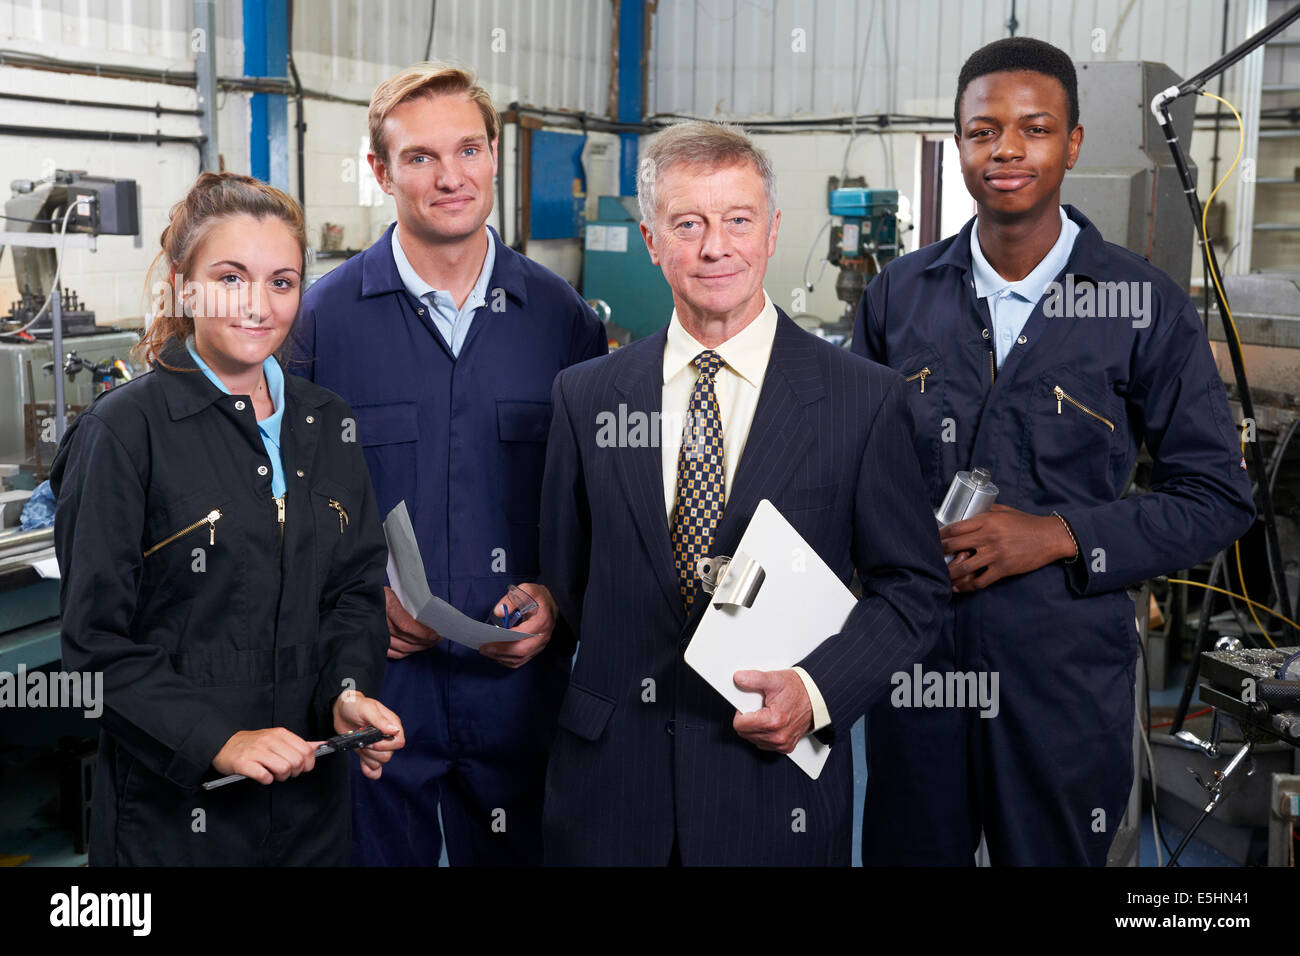 Portrait Of Manager And Staff In Engineering Factory Stock Photo